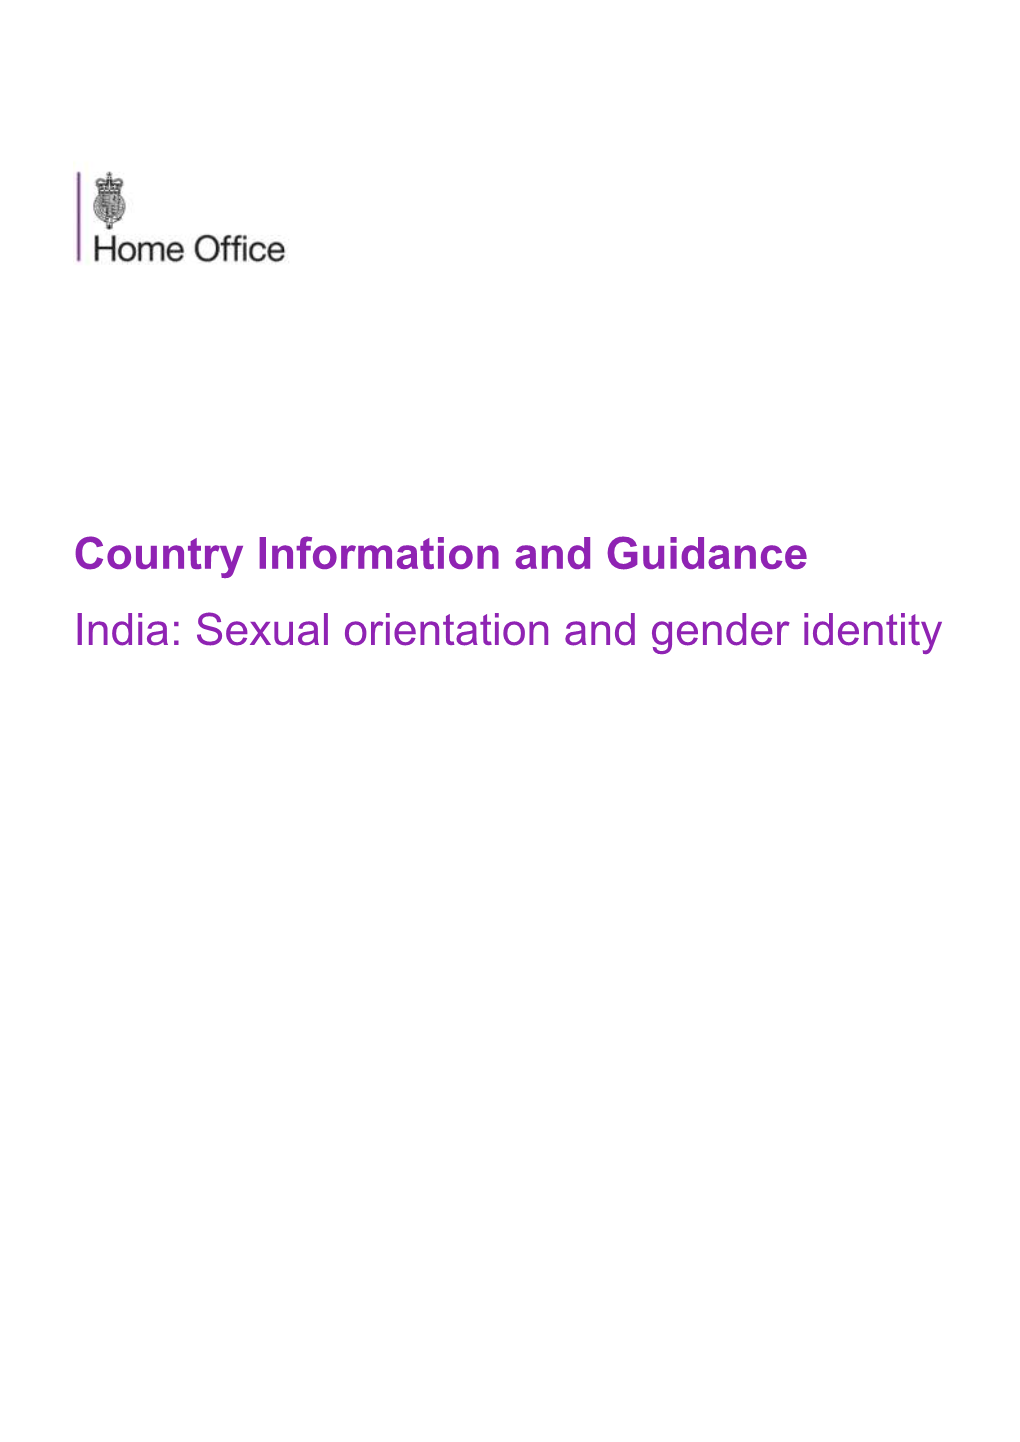 Country Information and Guidance India: Sexual Orientation and Gender Identity